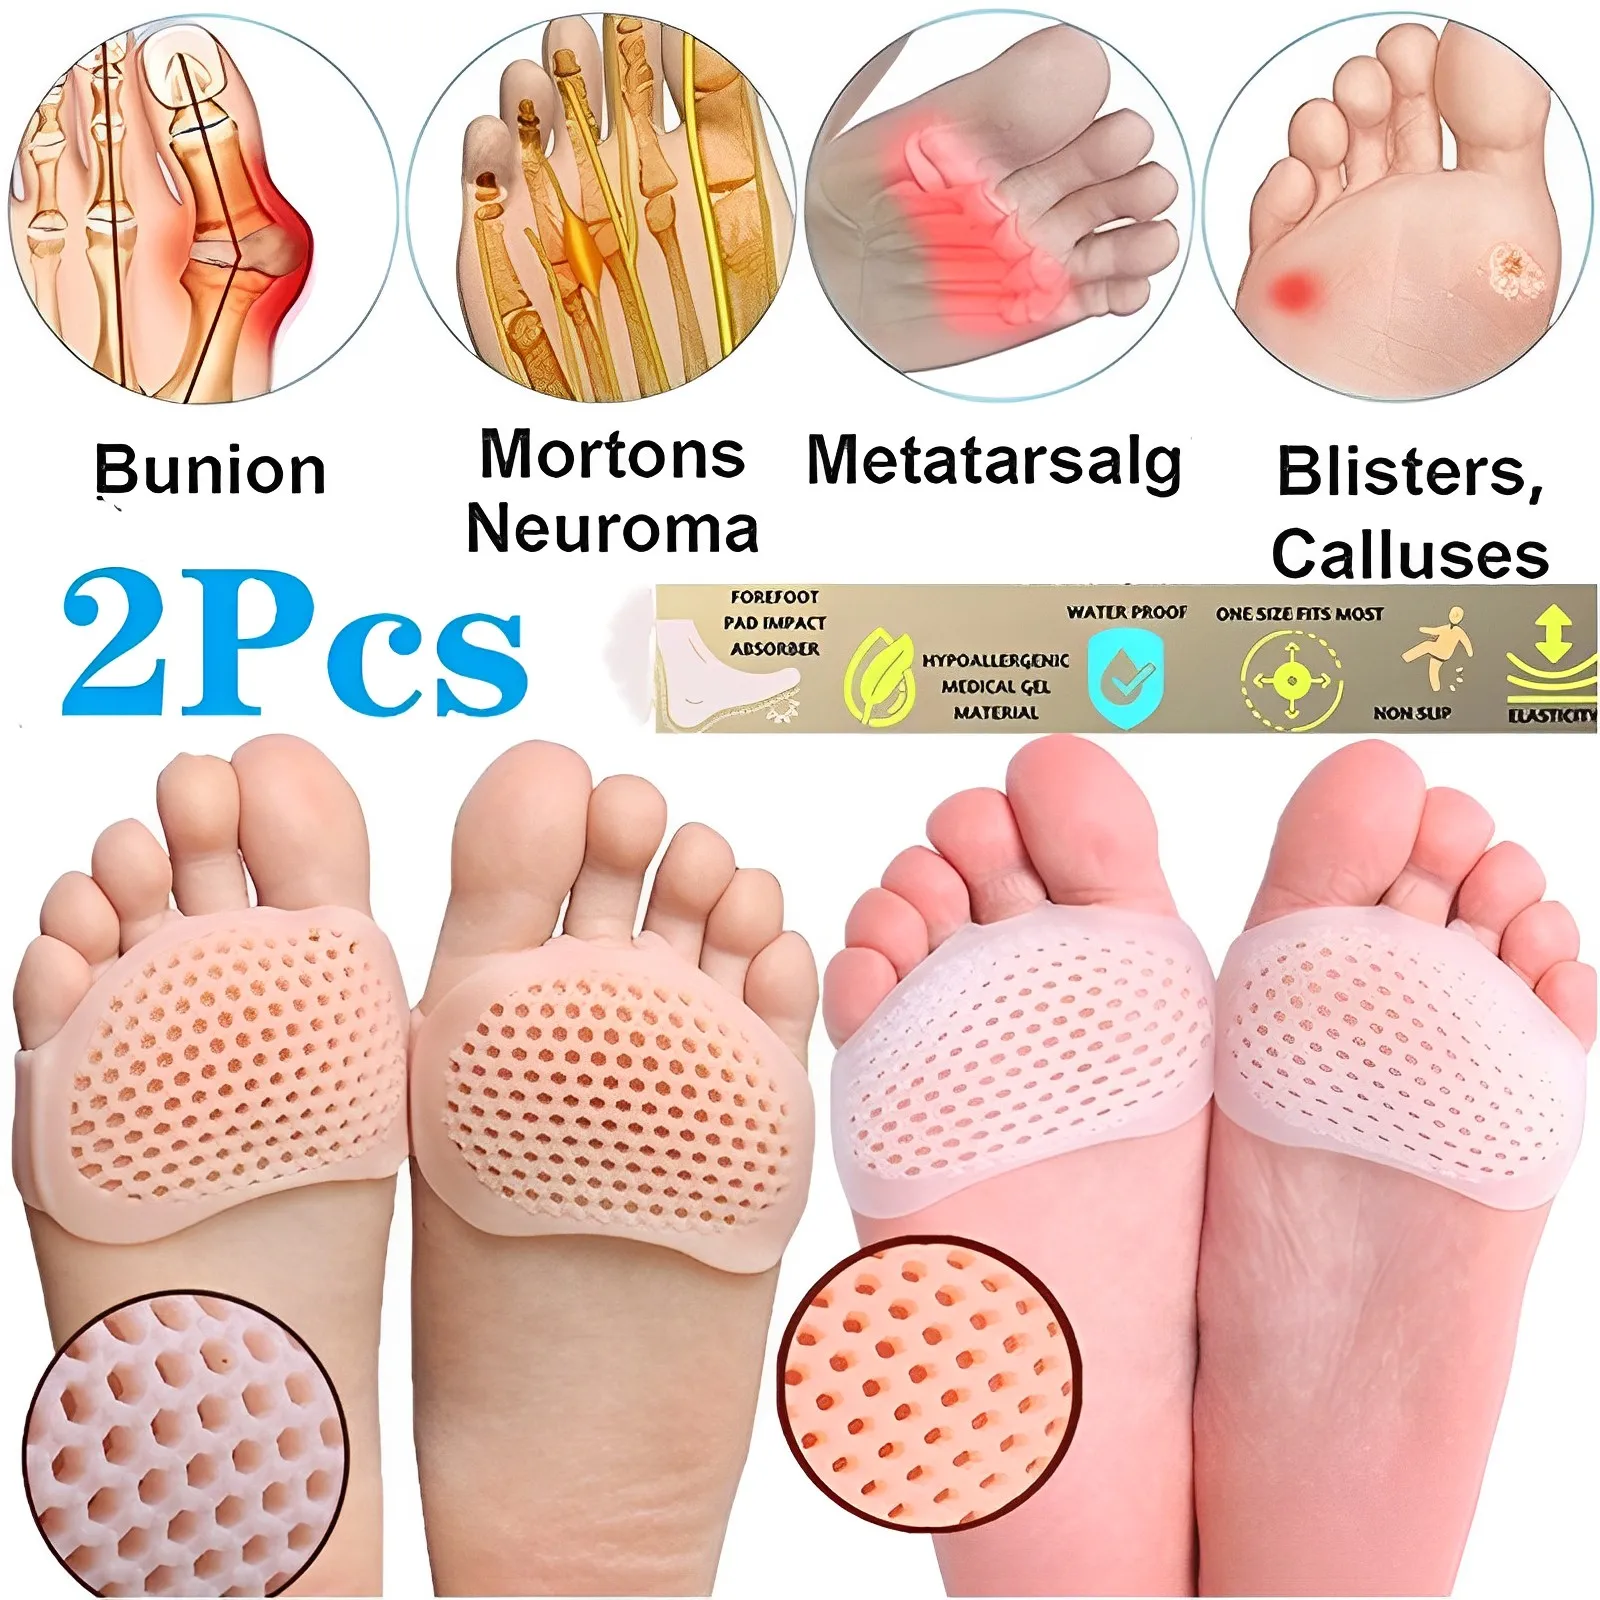 

2pcs Silicone Honeycomb Forefoot Insoles High Heel Shoes Pad Gel Insoles Breathable Health Care Shoe Insole Massage Shoe Insert